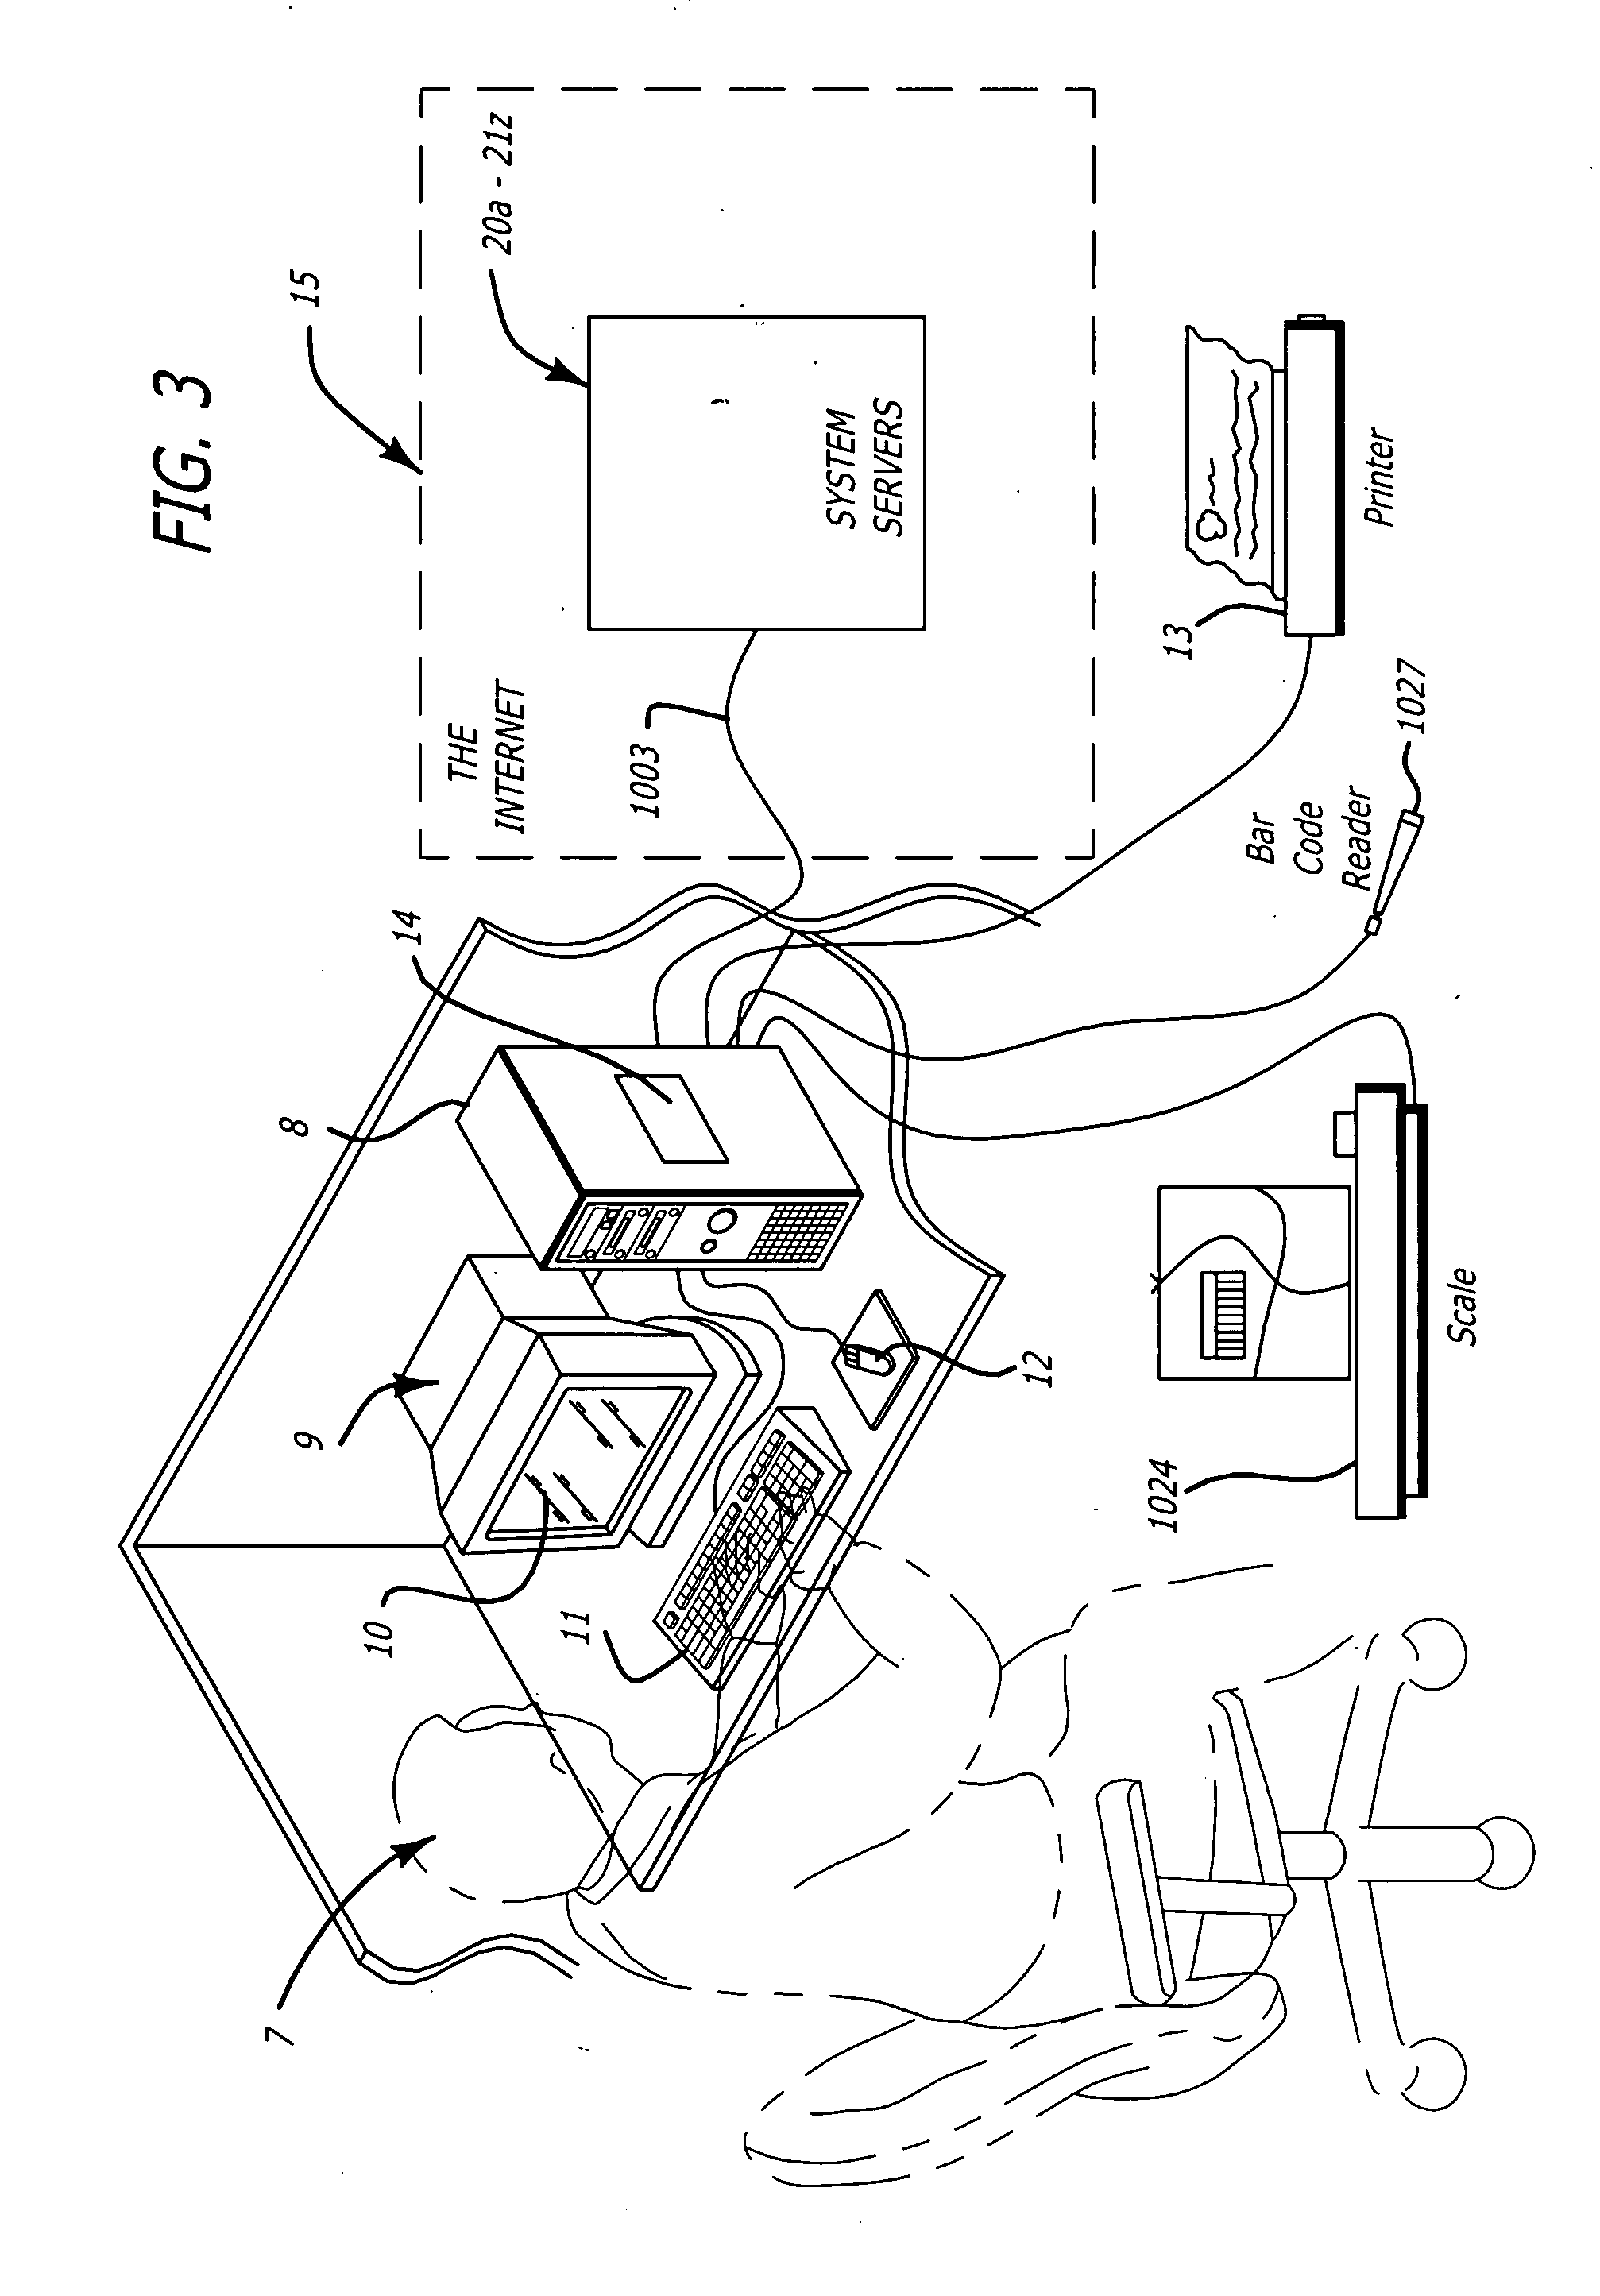 Apparatus, systems and methods for interfacing with digital scales configured with remote client computer devices